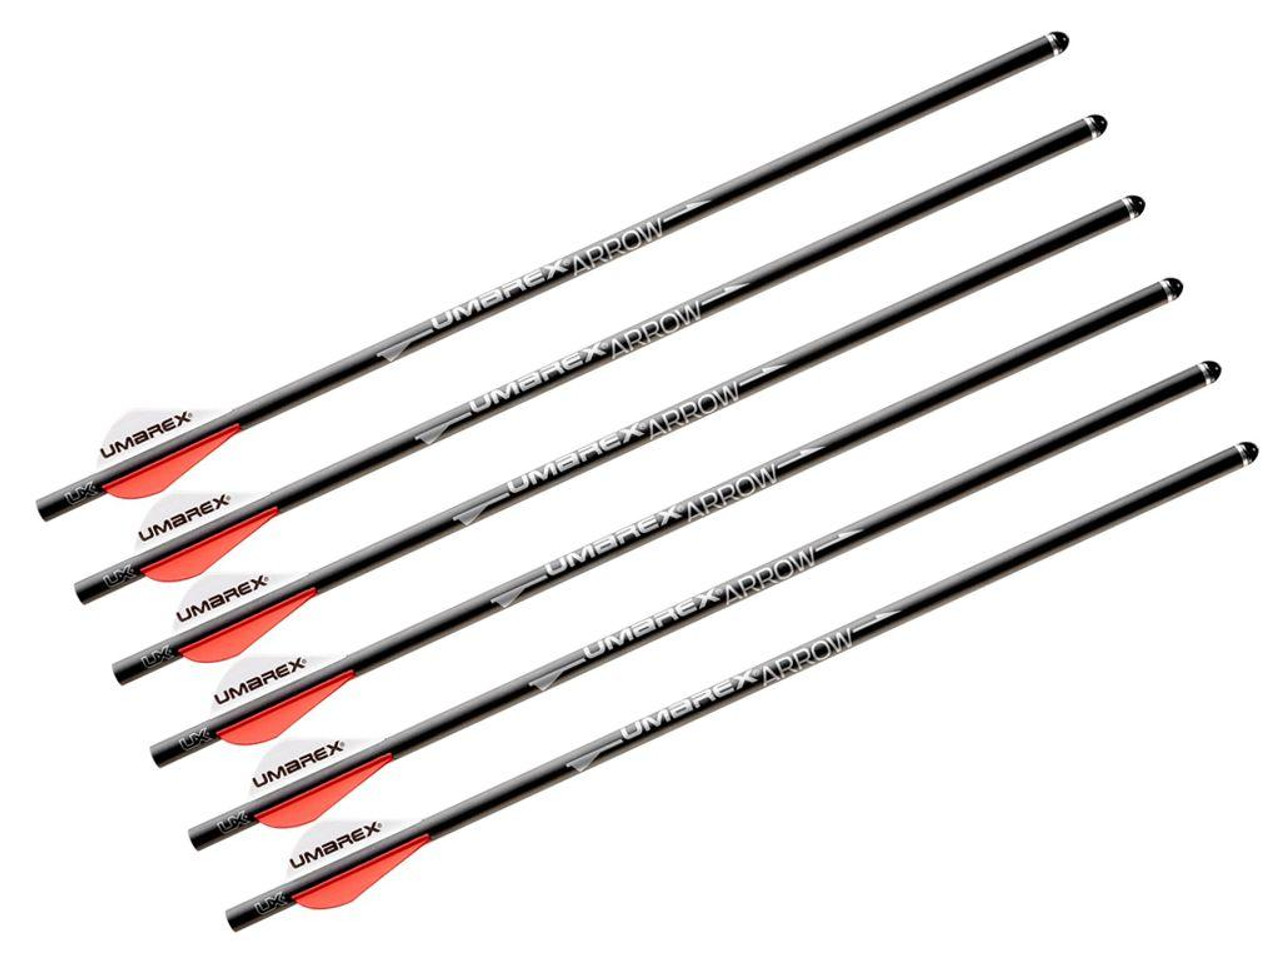 Key Features of the Umarex AirJavelin Arrows, 6 pack:
Designed for use with Umarex AirJavelin
Straight flight technology
Carbon fiber
170gr arrow shaft
50gr field tip
Accepts broadheads
6 pack